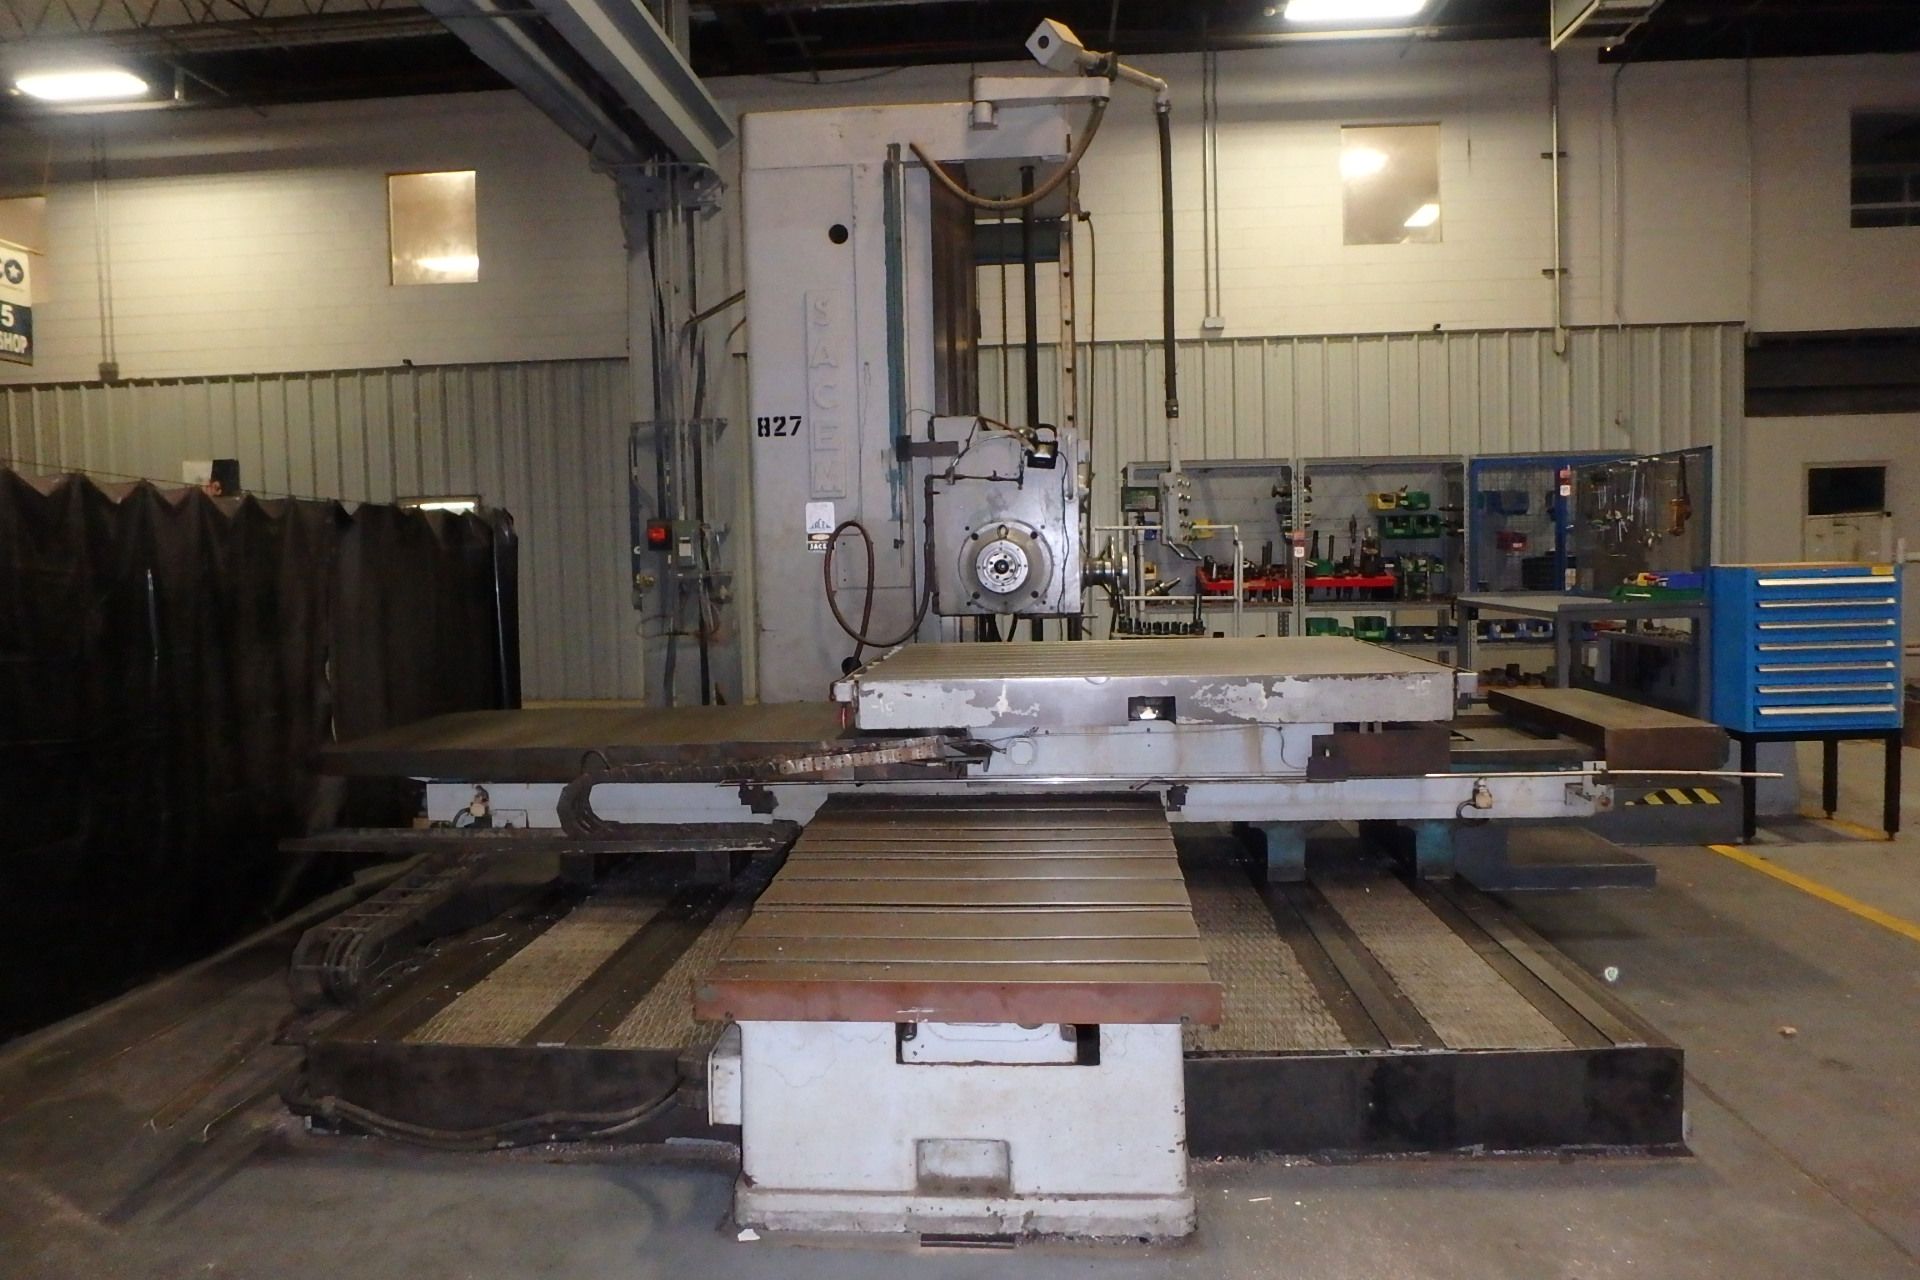 5" SACEM MST 130 Horizontal Table Type Boring Mill, s/n 1141, w/ 78.75" x 63" Built-In Rotary Table, - Image 4 of 8